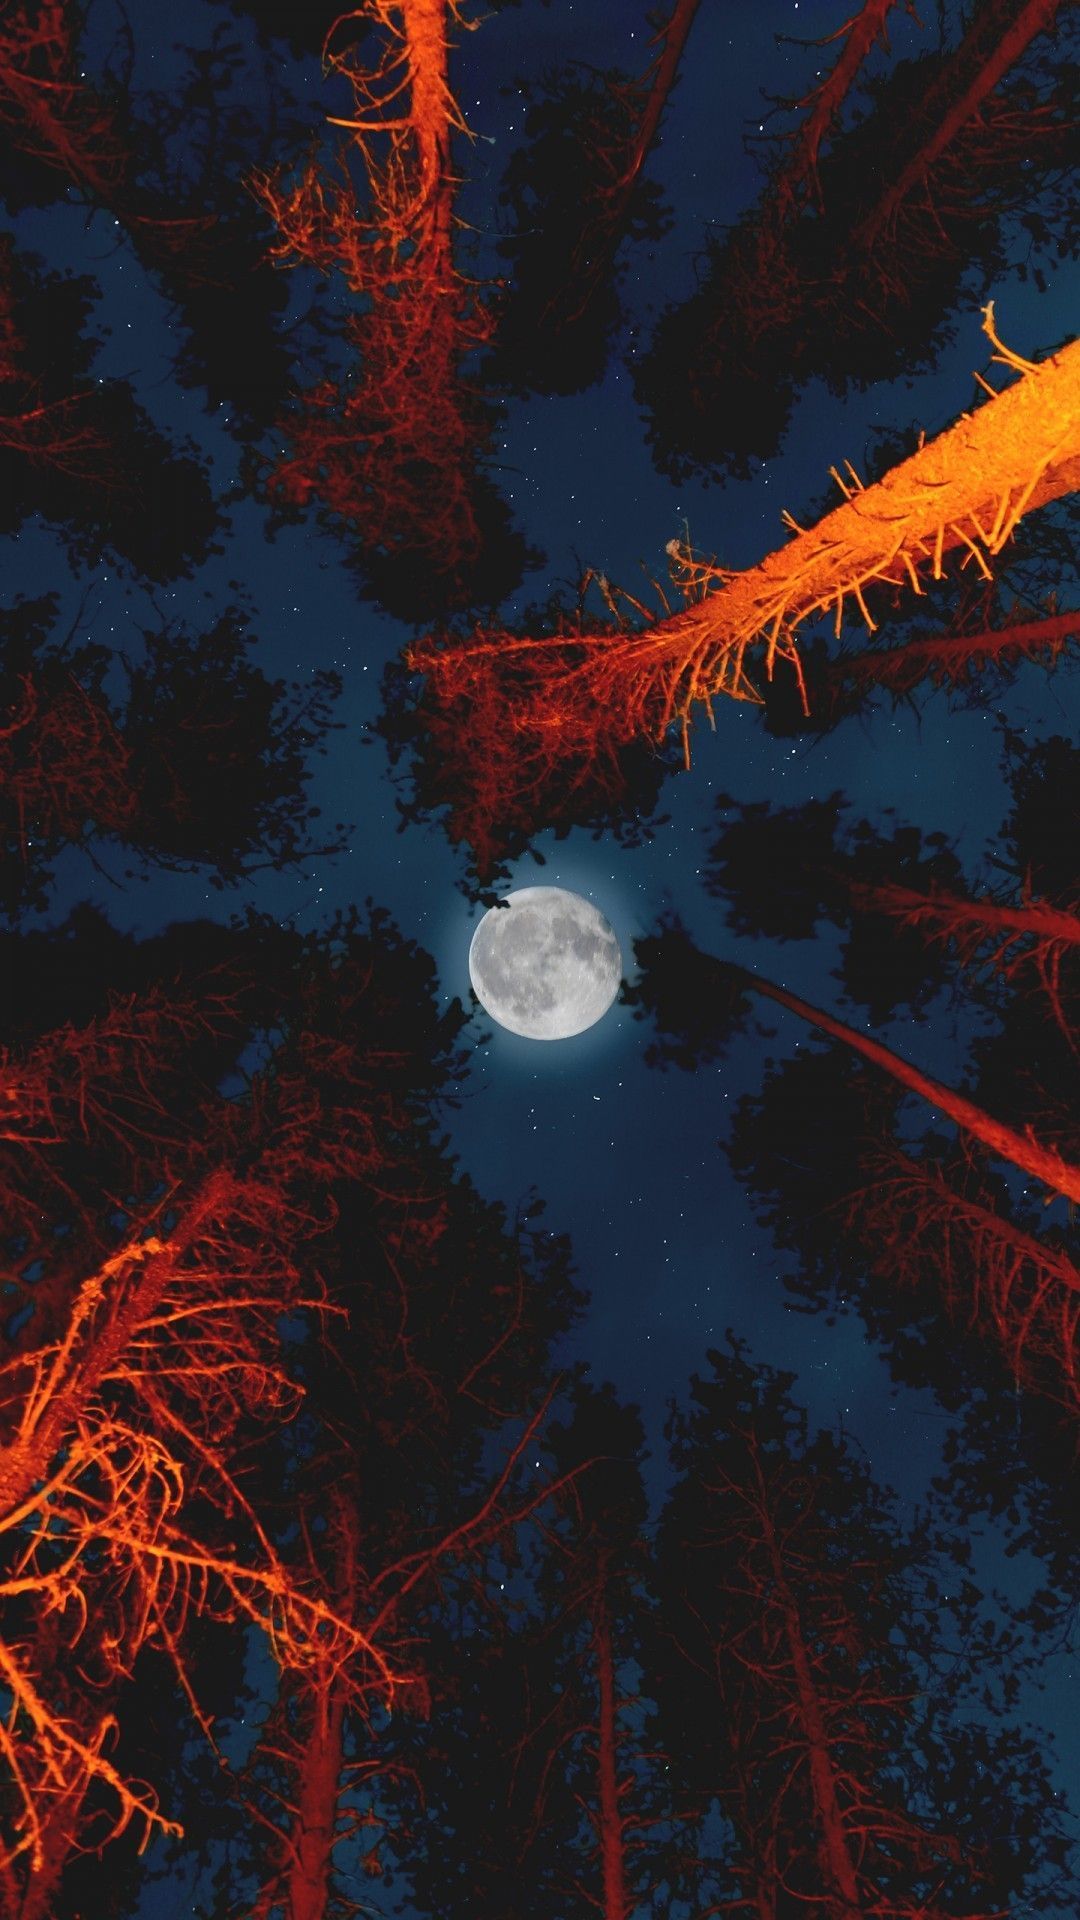 IPhone wallpaper with a night sky and a full moon - Dark orange